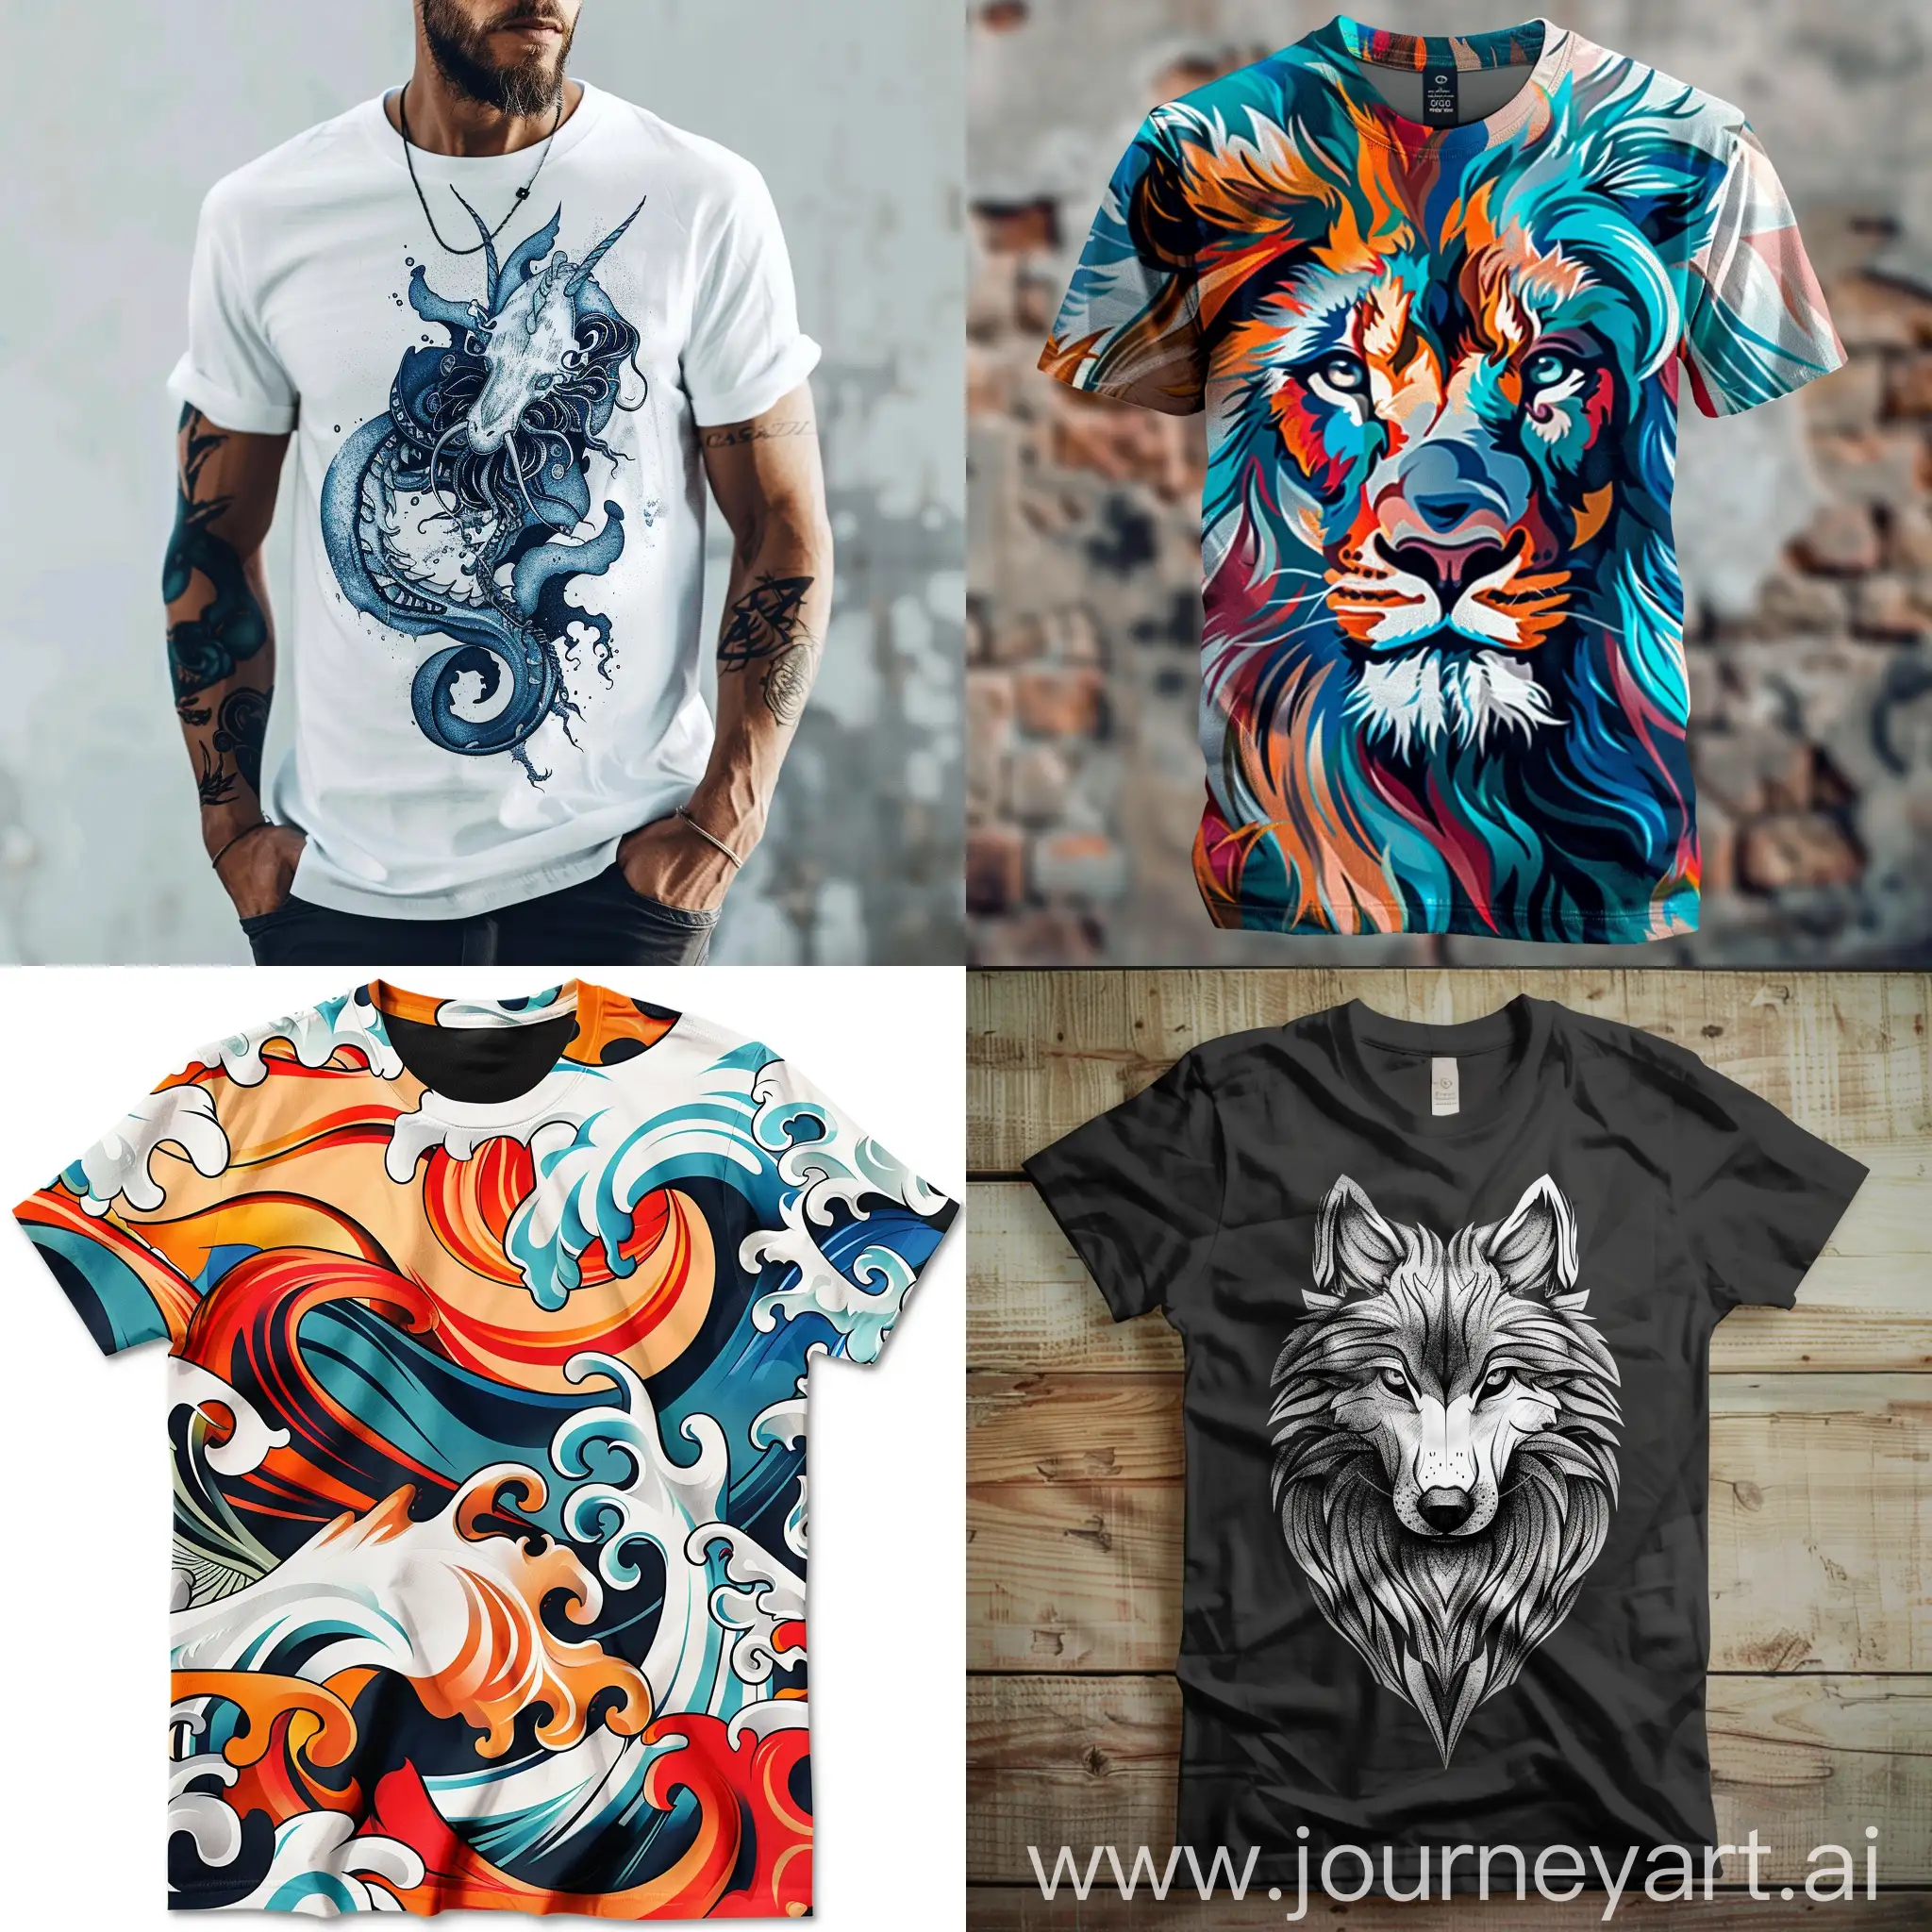 Create a design to print on t shirt
